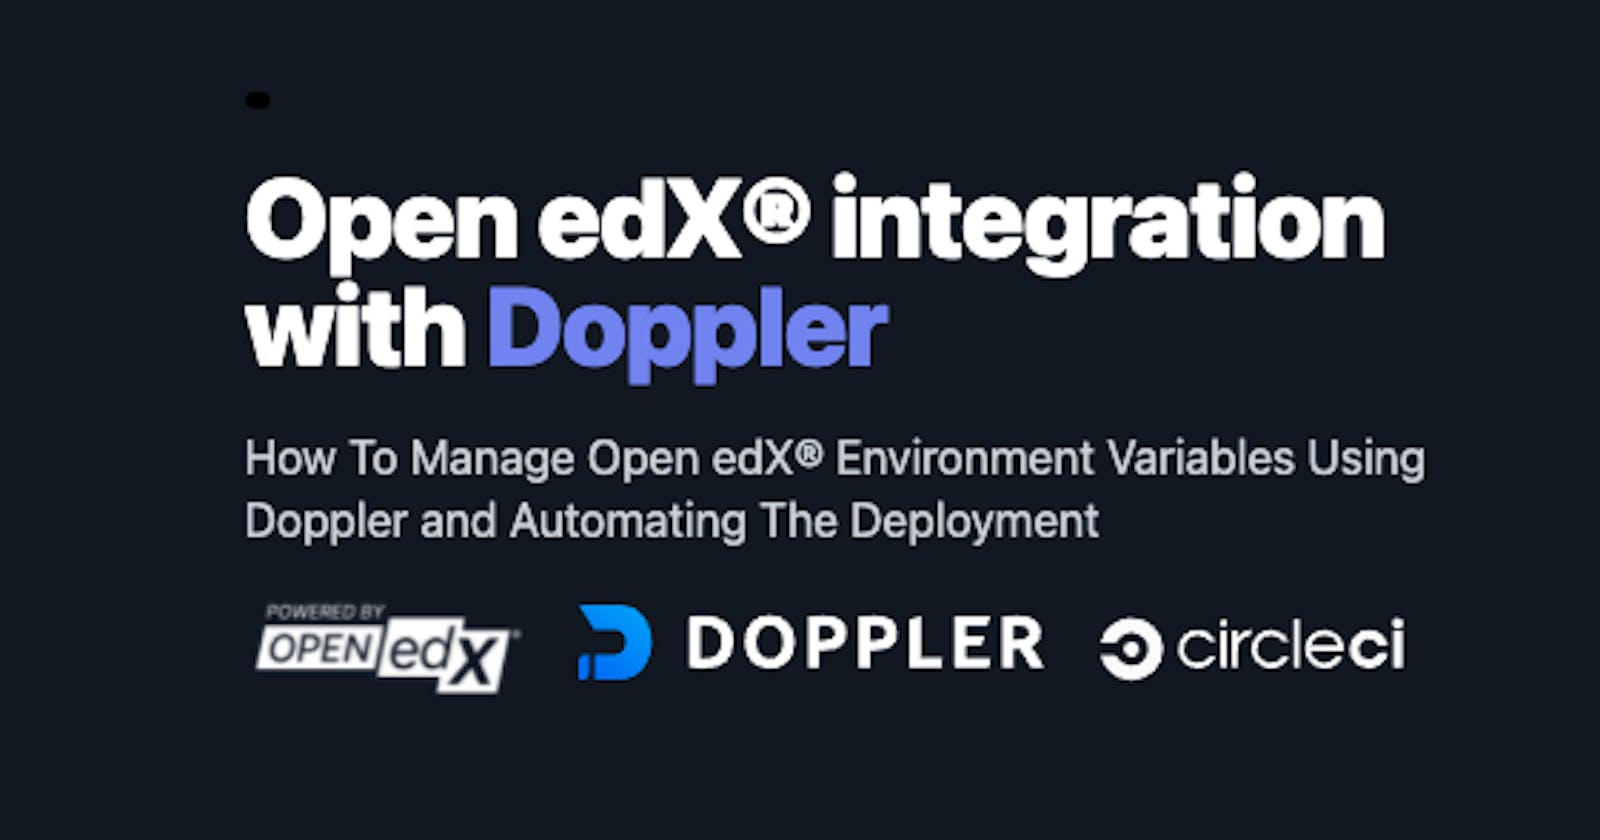 How To Manage Open edX® Environment Variables Using Doppler and Automating The Deployment